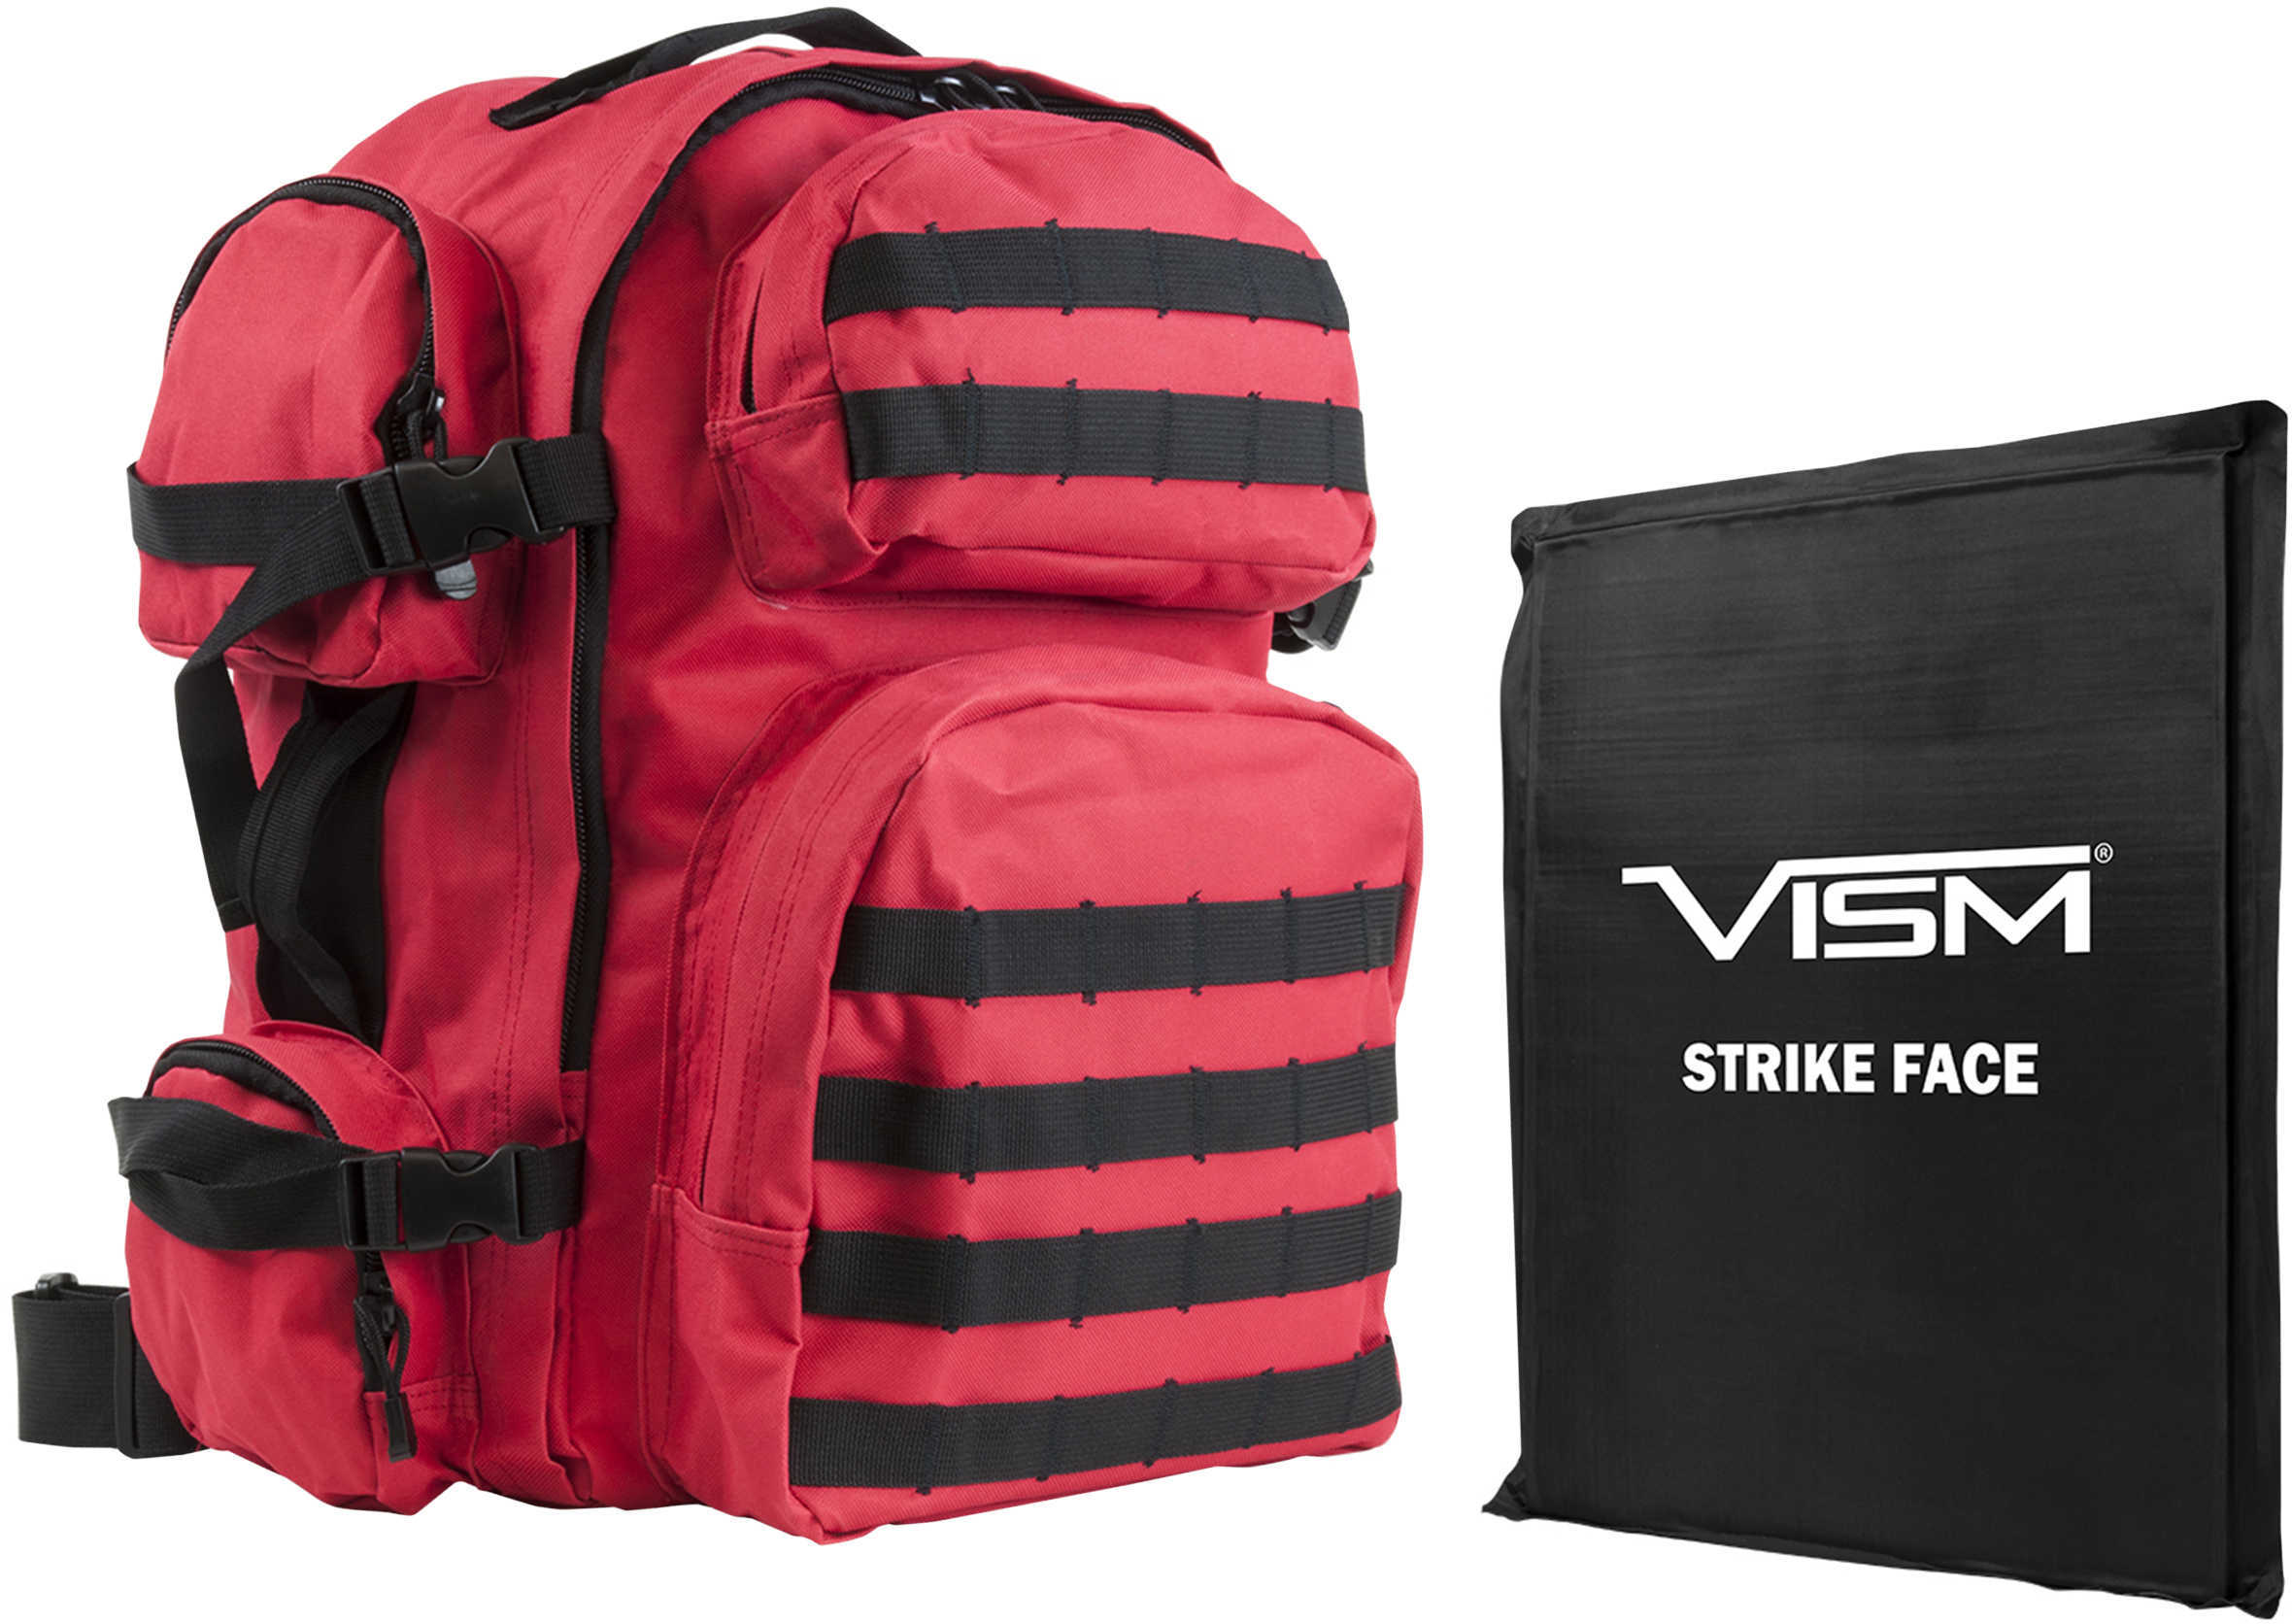 NcStar Tactical Backpack with 10" x 12" Square Panels Red Black Trim Md: BSCBR2911-A